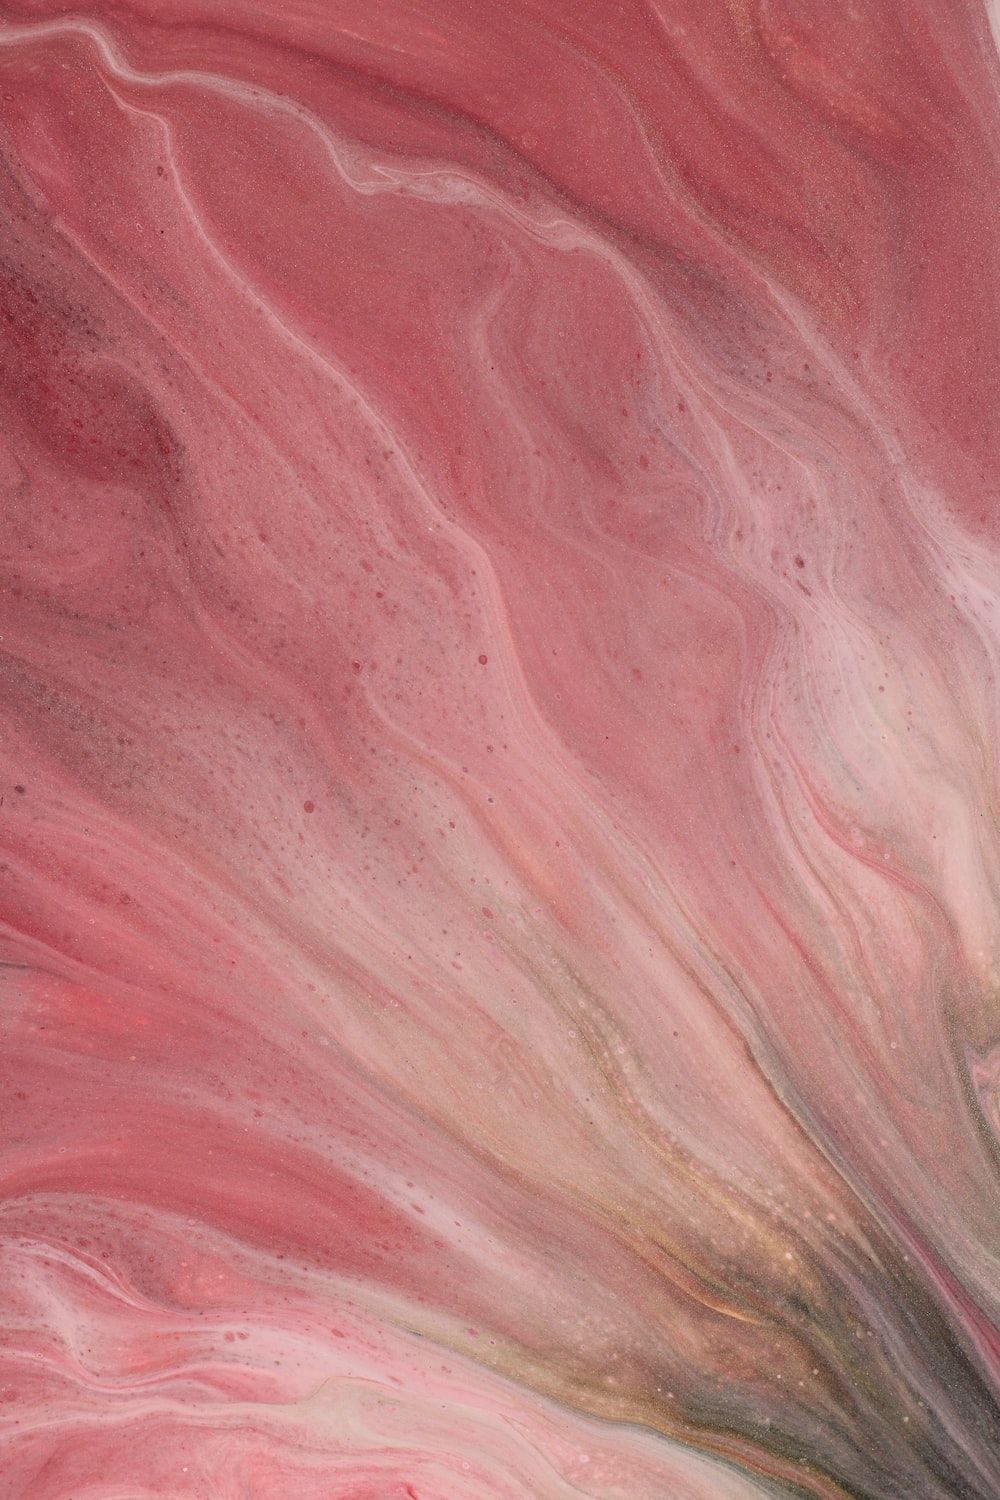 A close up of a pink and white abstract painting - Coral